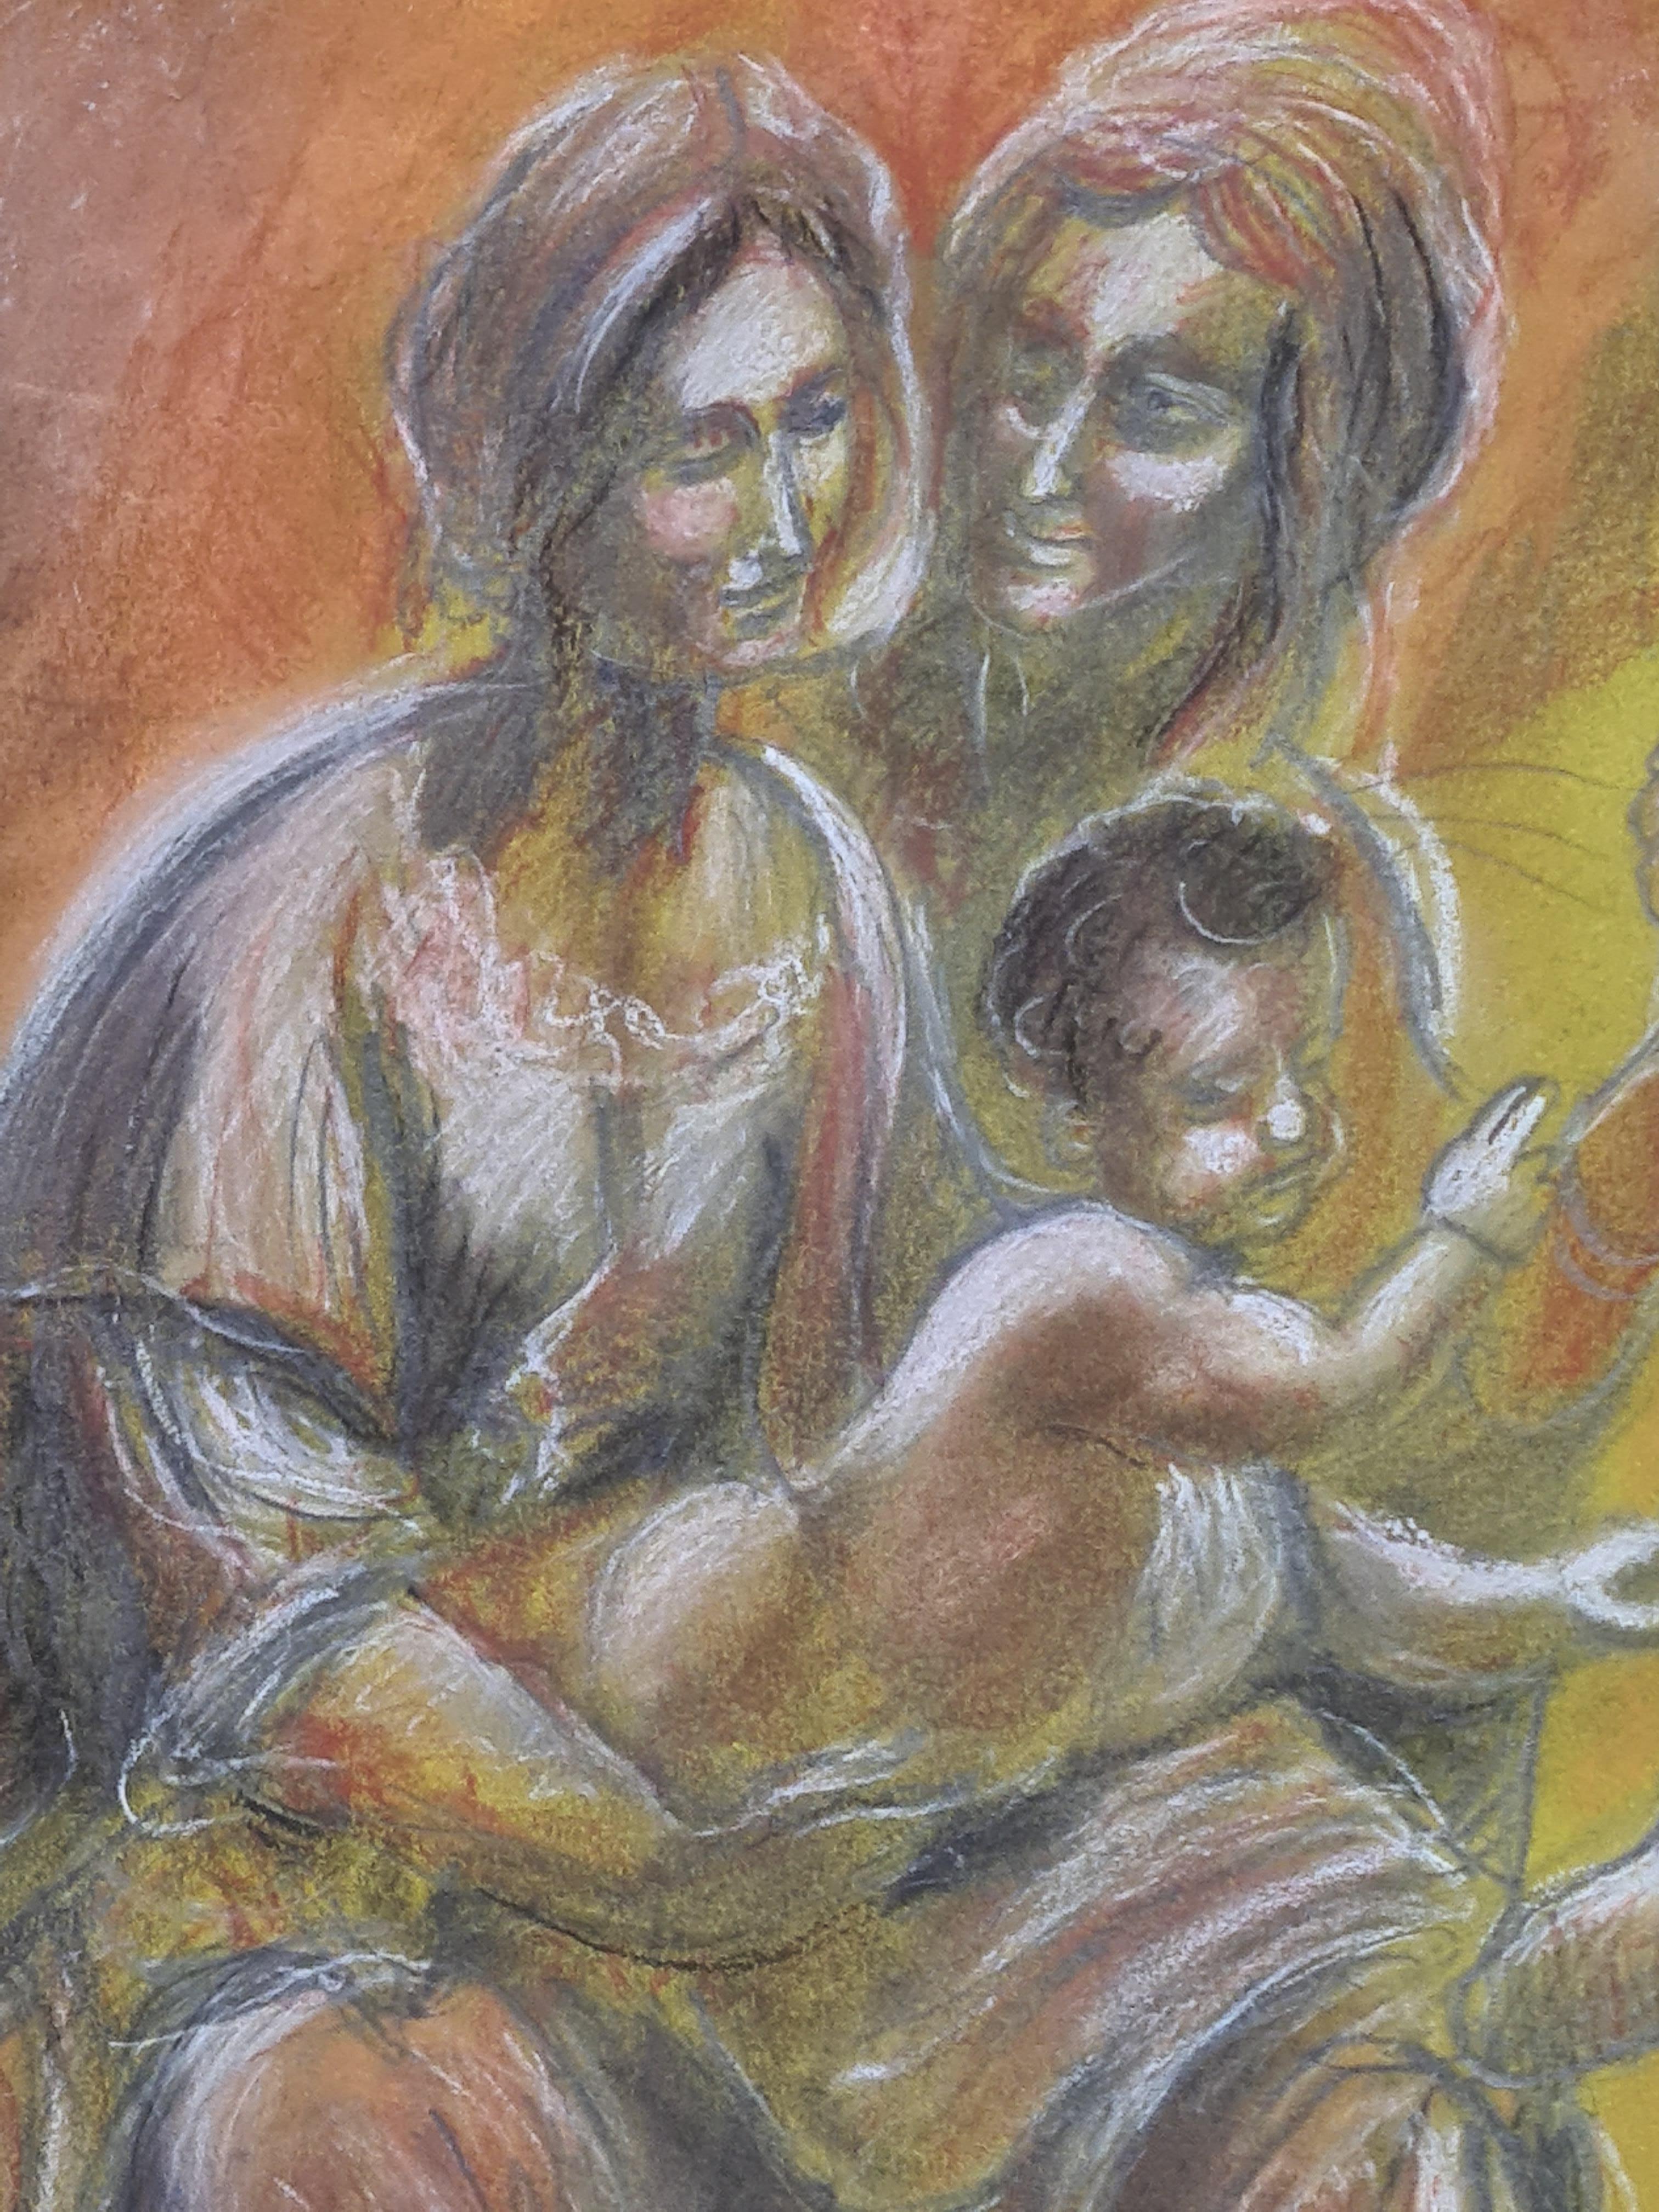 A pencil, chalk and crayon drawing of the Virgin and Child with St Anne inspired by the 'cartoon' of Leonard da Vinci currently held in the National Gallery London.

An elegant and charming stylised drawing after the work by D Vinci. The artist has